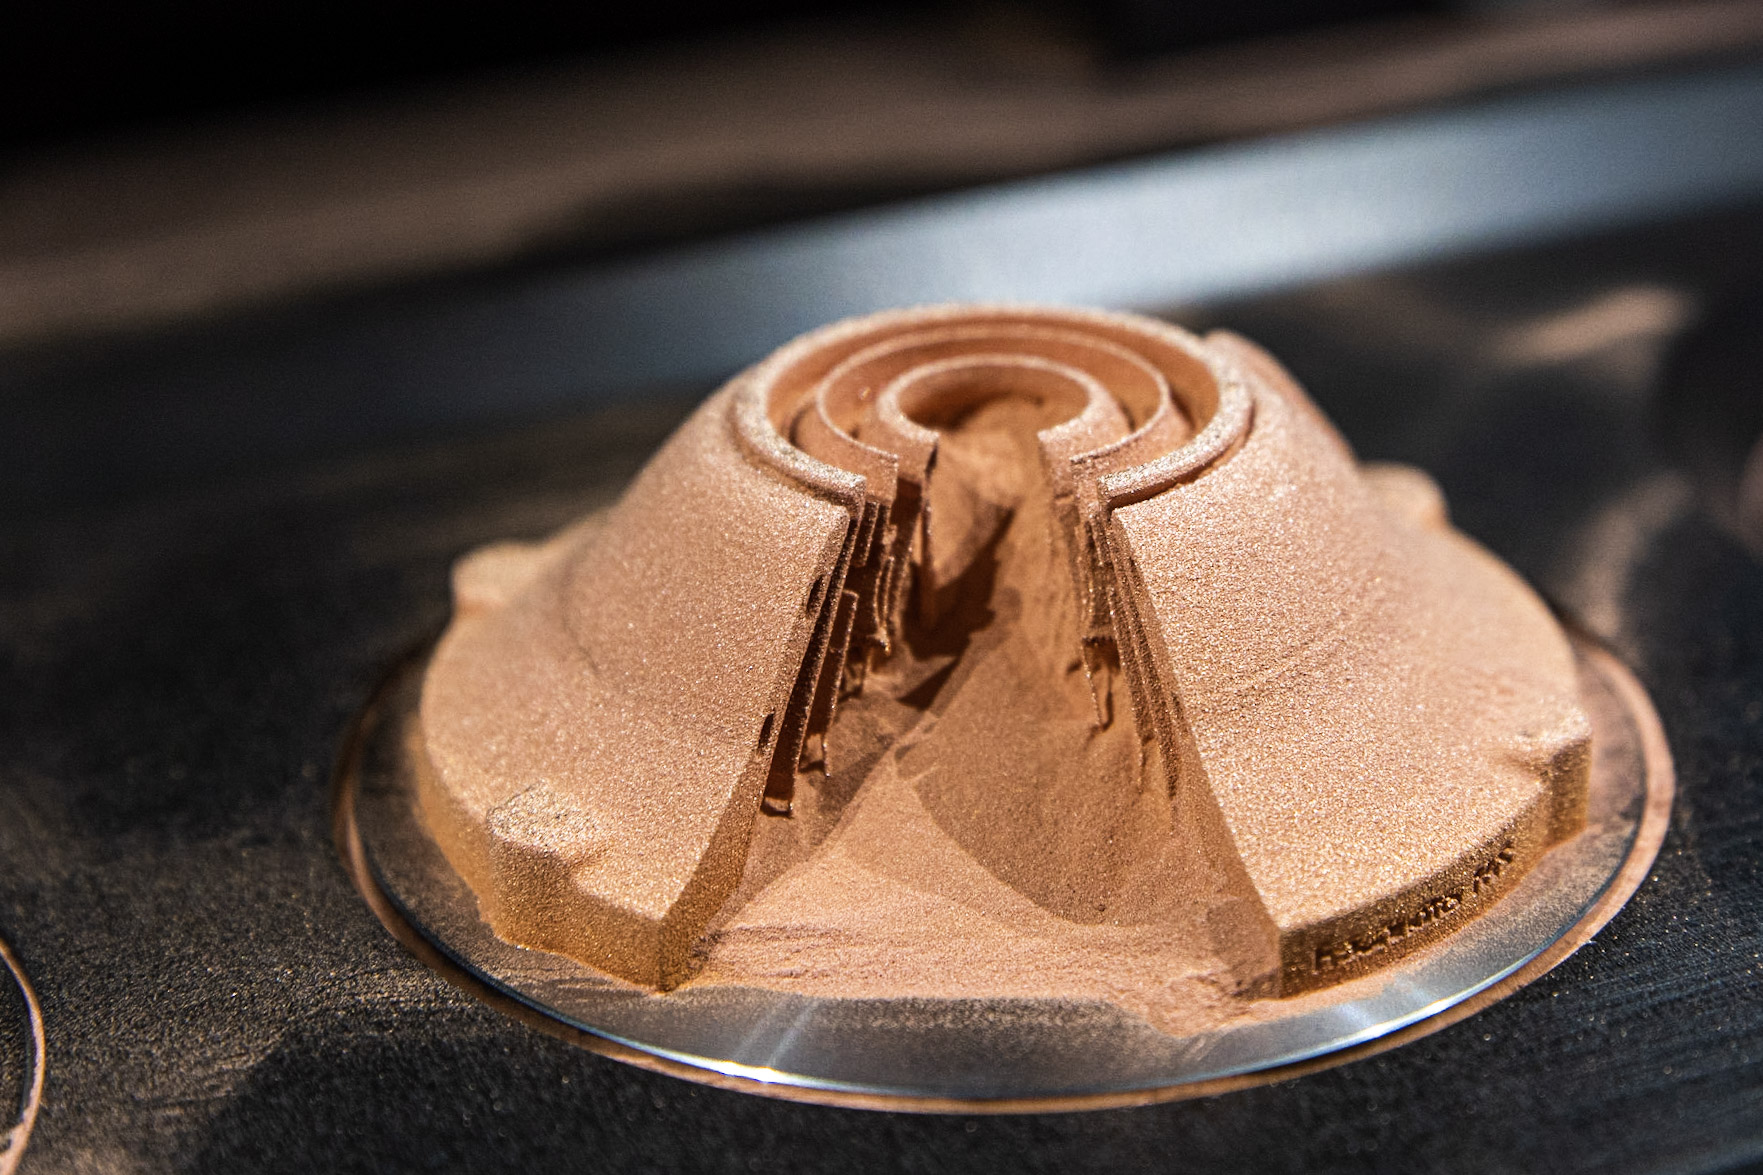 The new additive manufacturing system completely melts pure copper powder.